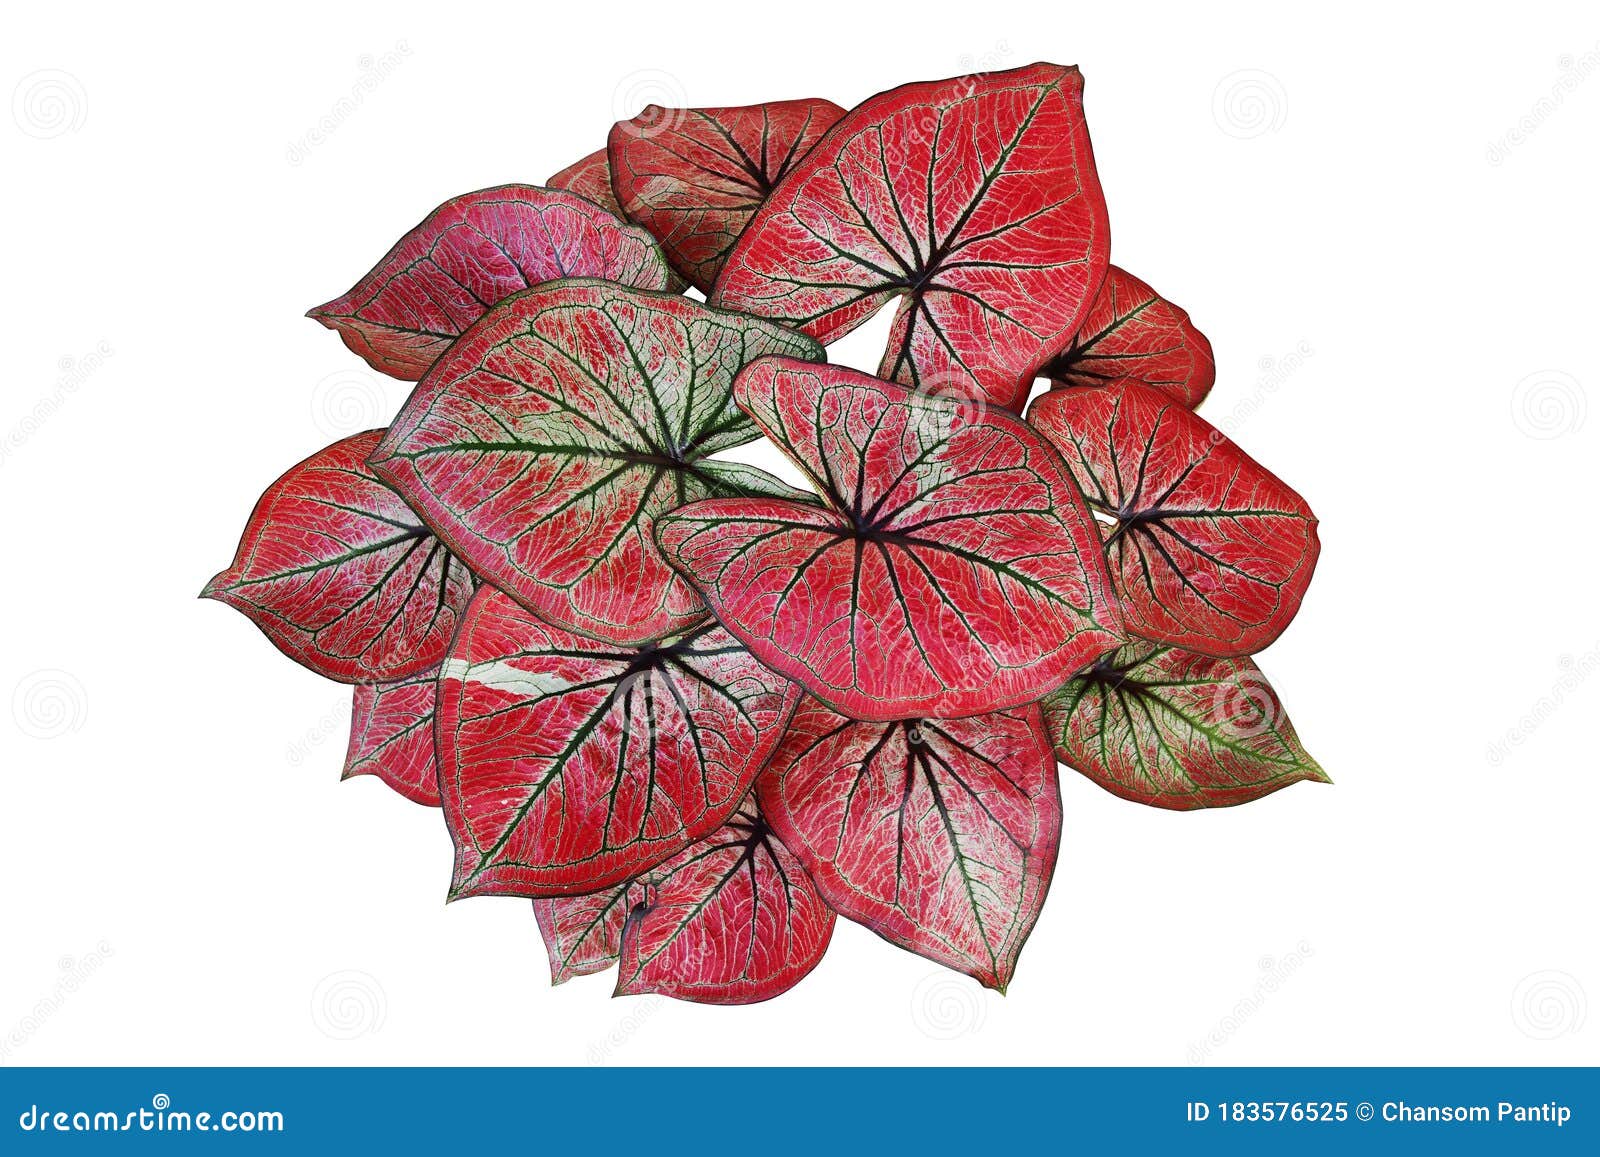 Beautiful Red Caladium Leaves Pattern or Elephant Ear the Tropical ...